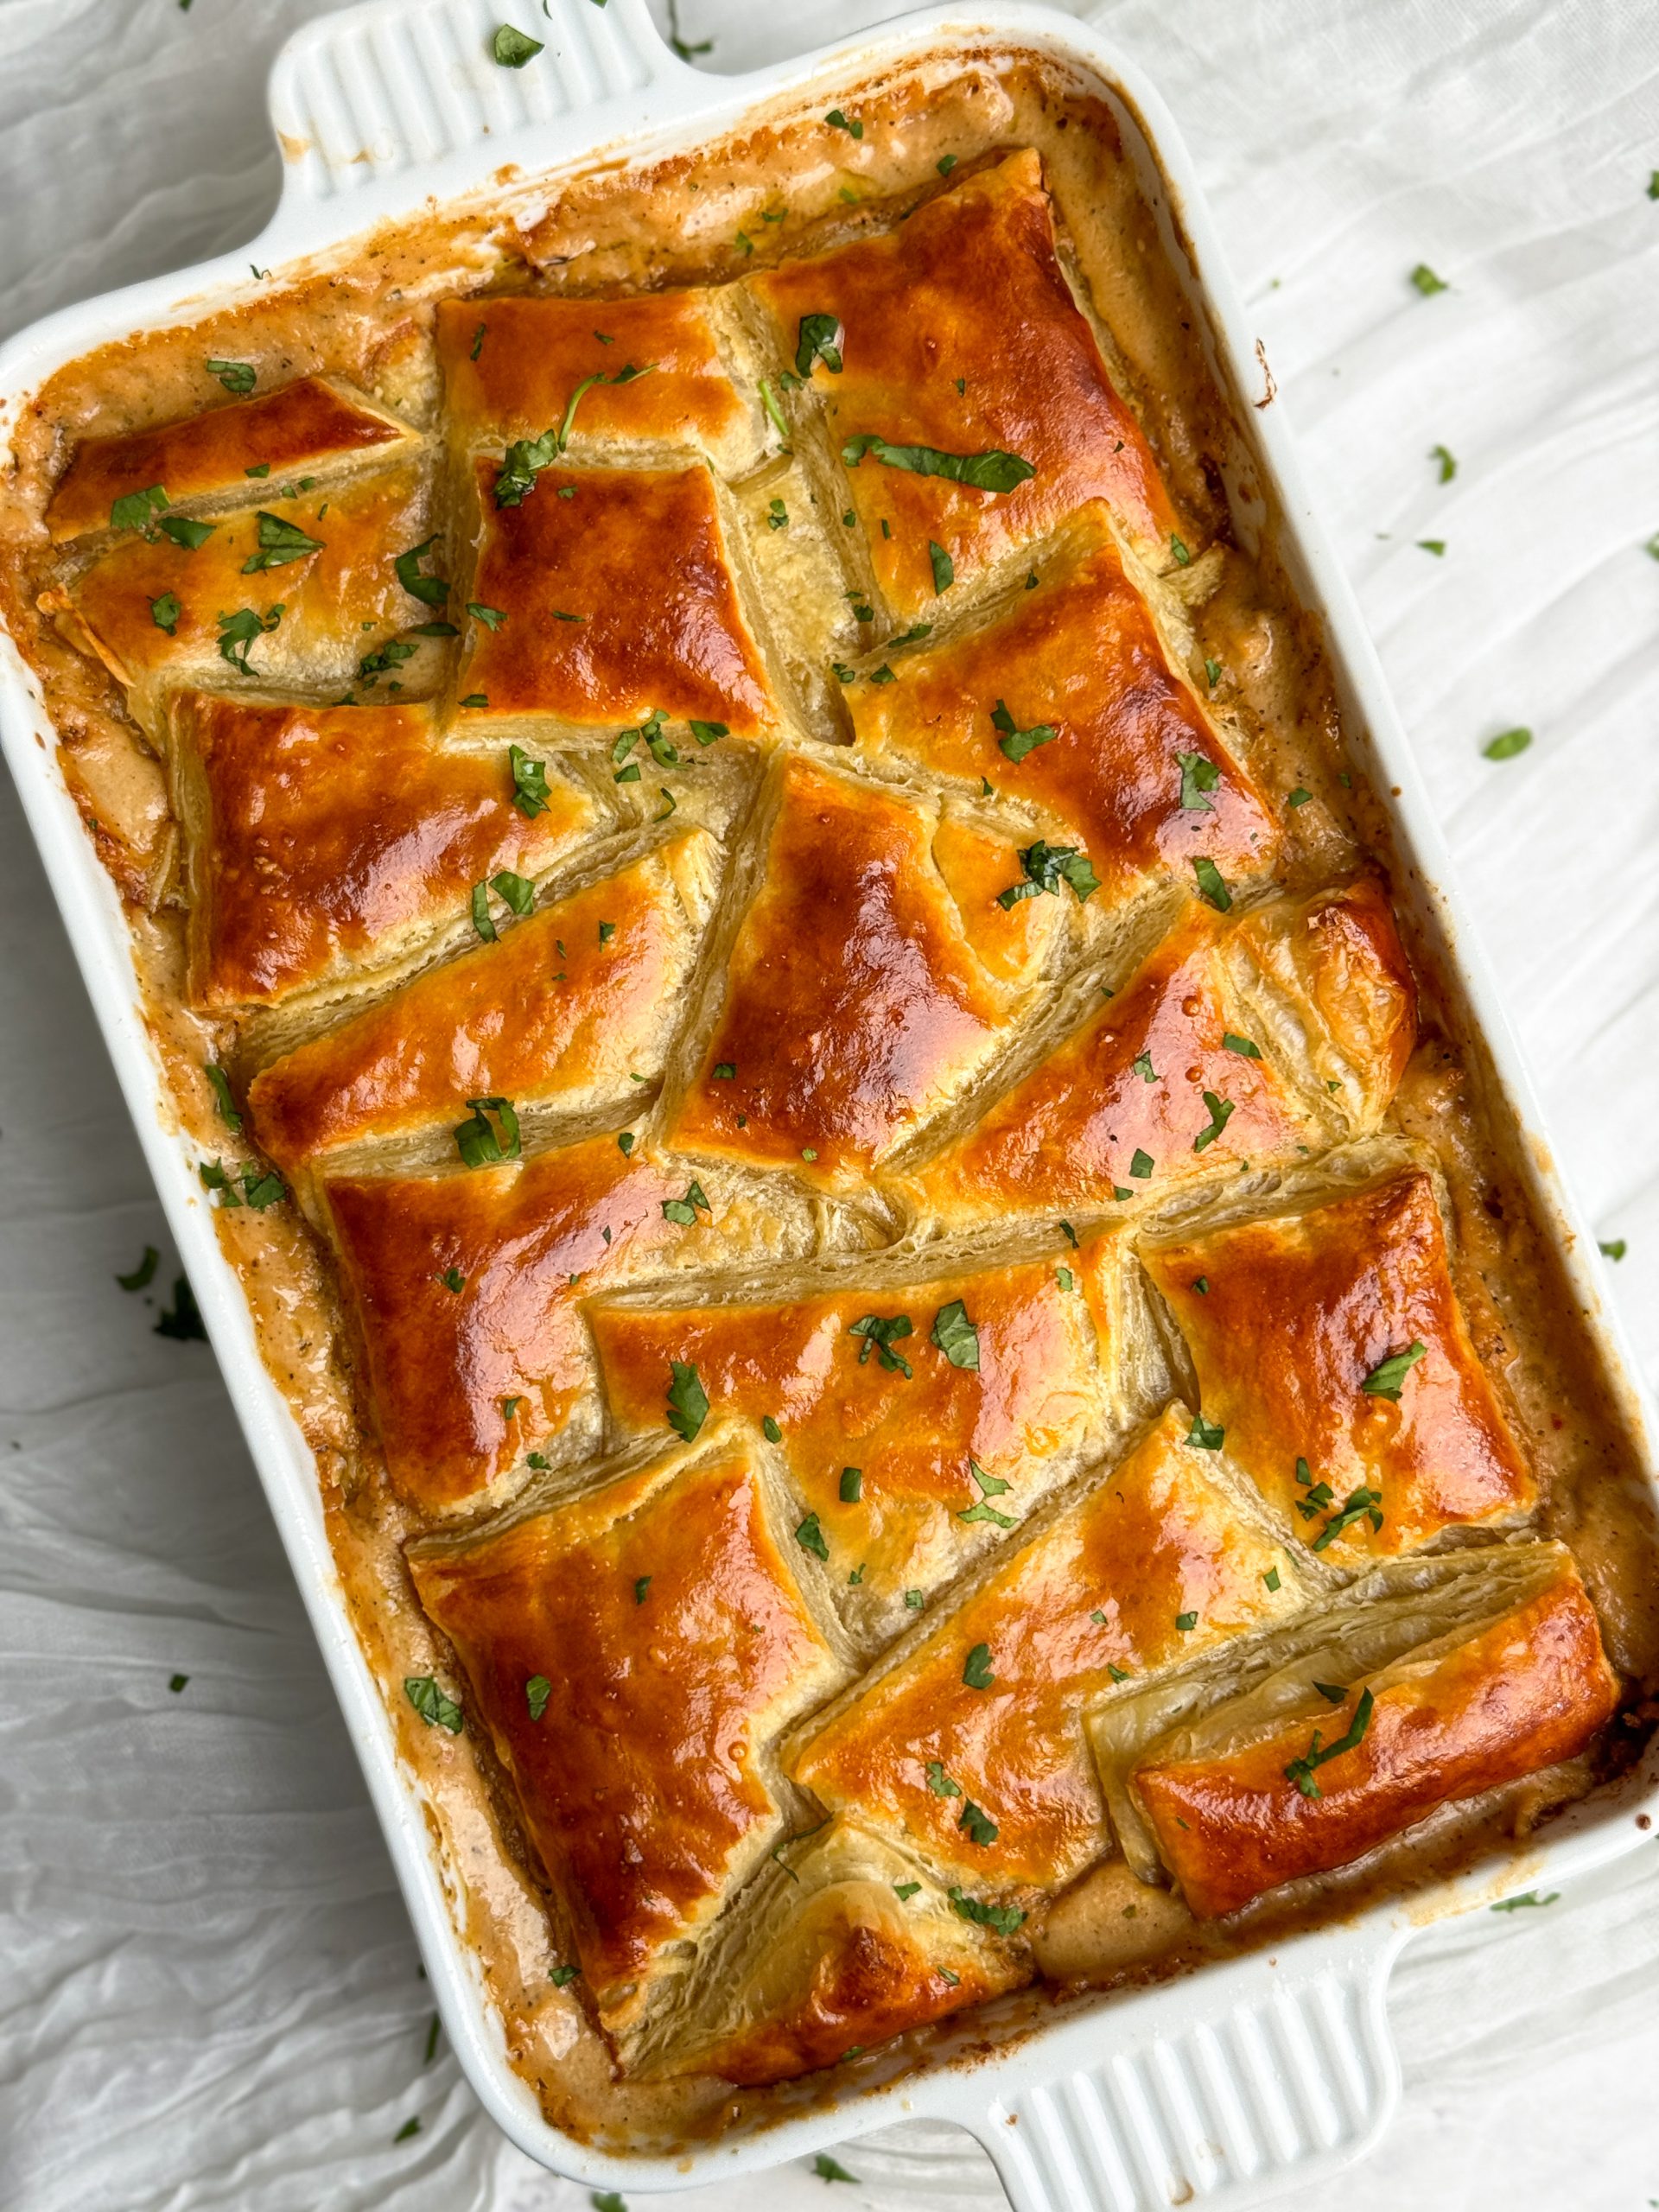 a rectangular dish with chicken pot pie inside. there are squares of golden crispy pastry arranged in a beautiful pattern on top of the pie, garnished with parsley